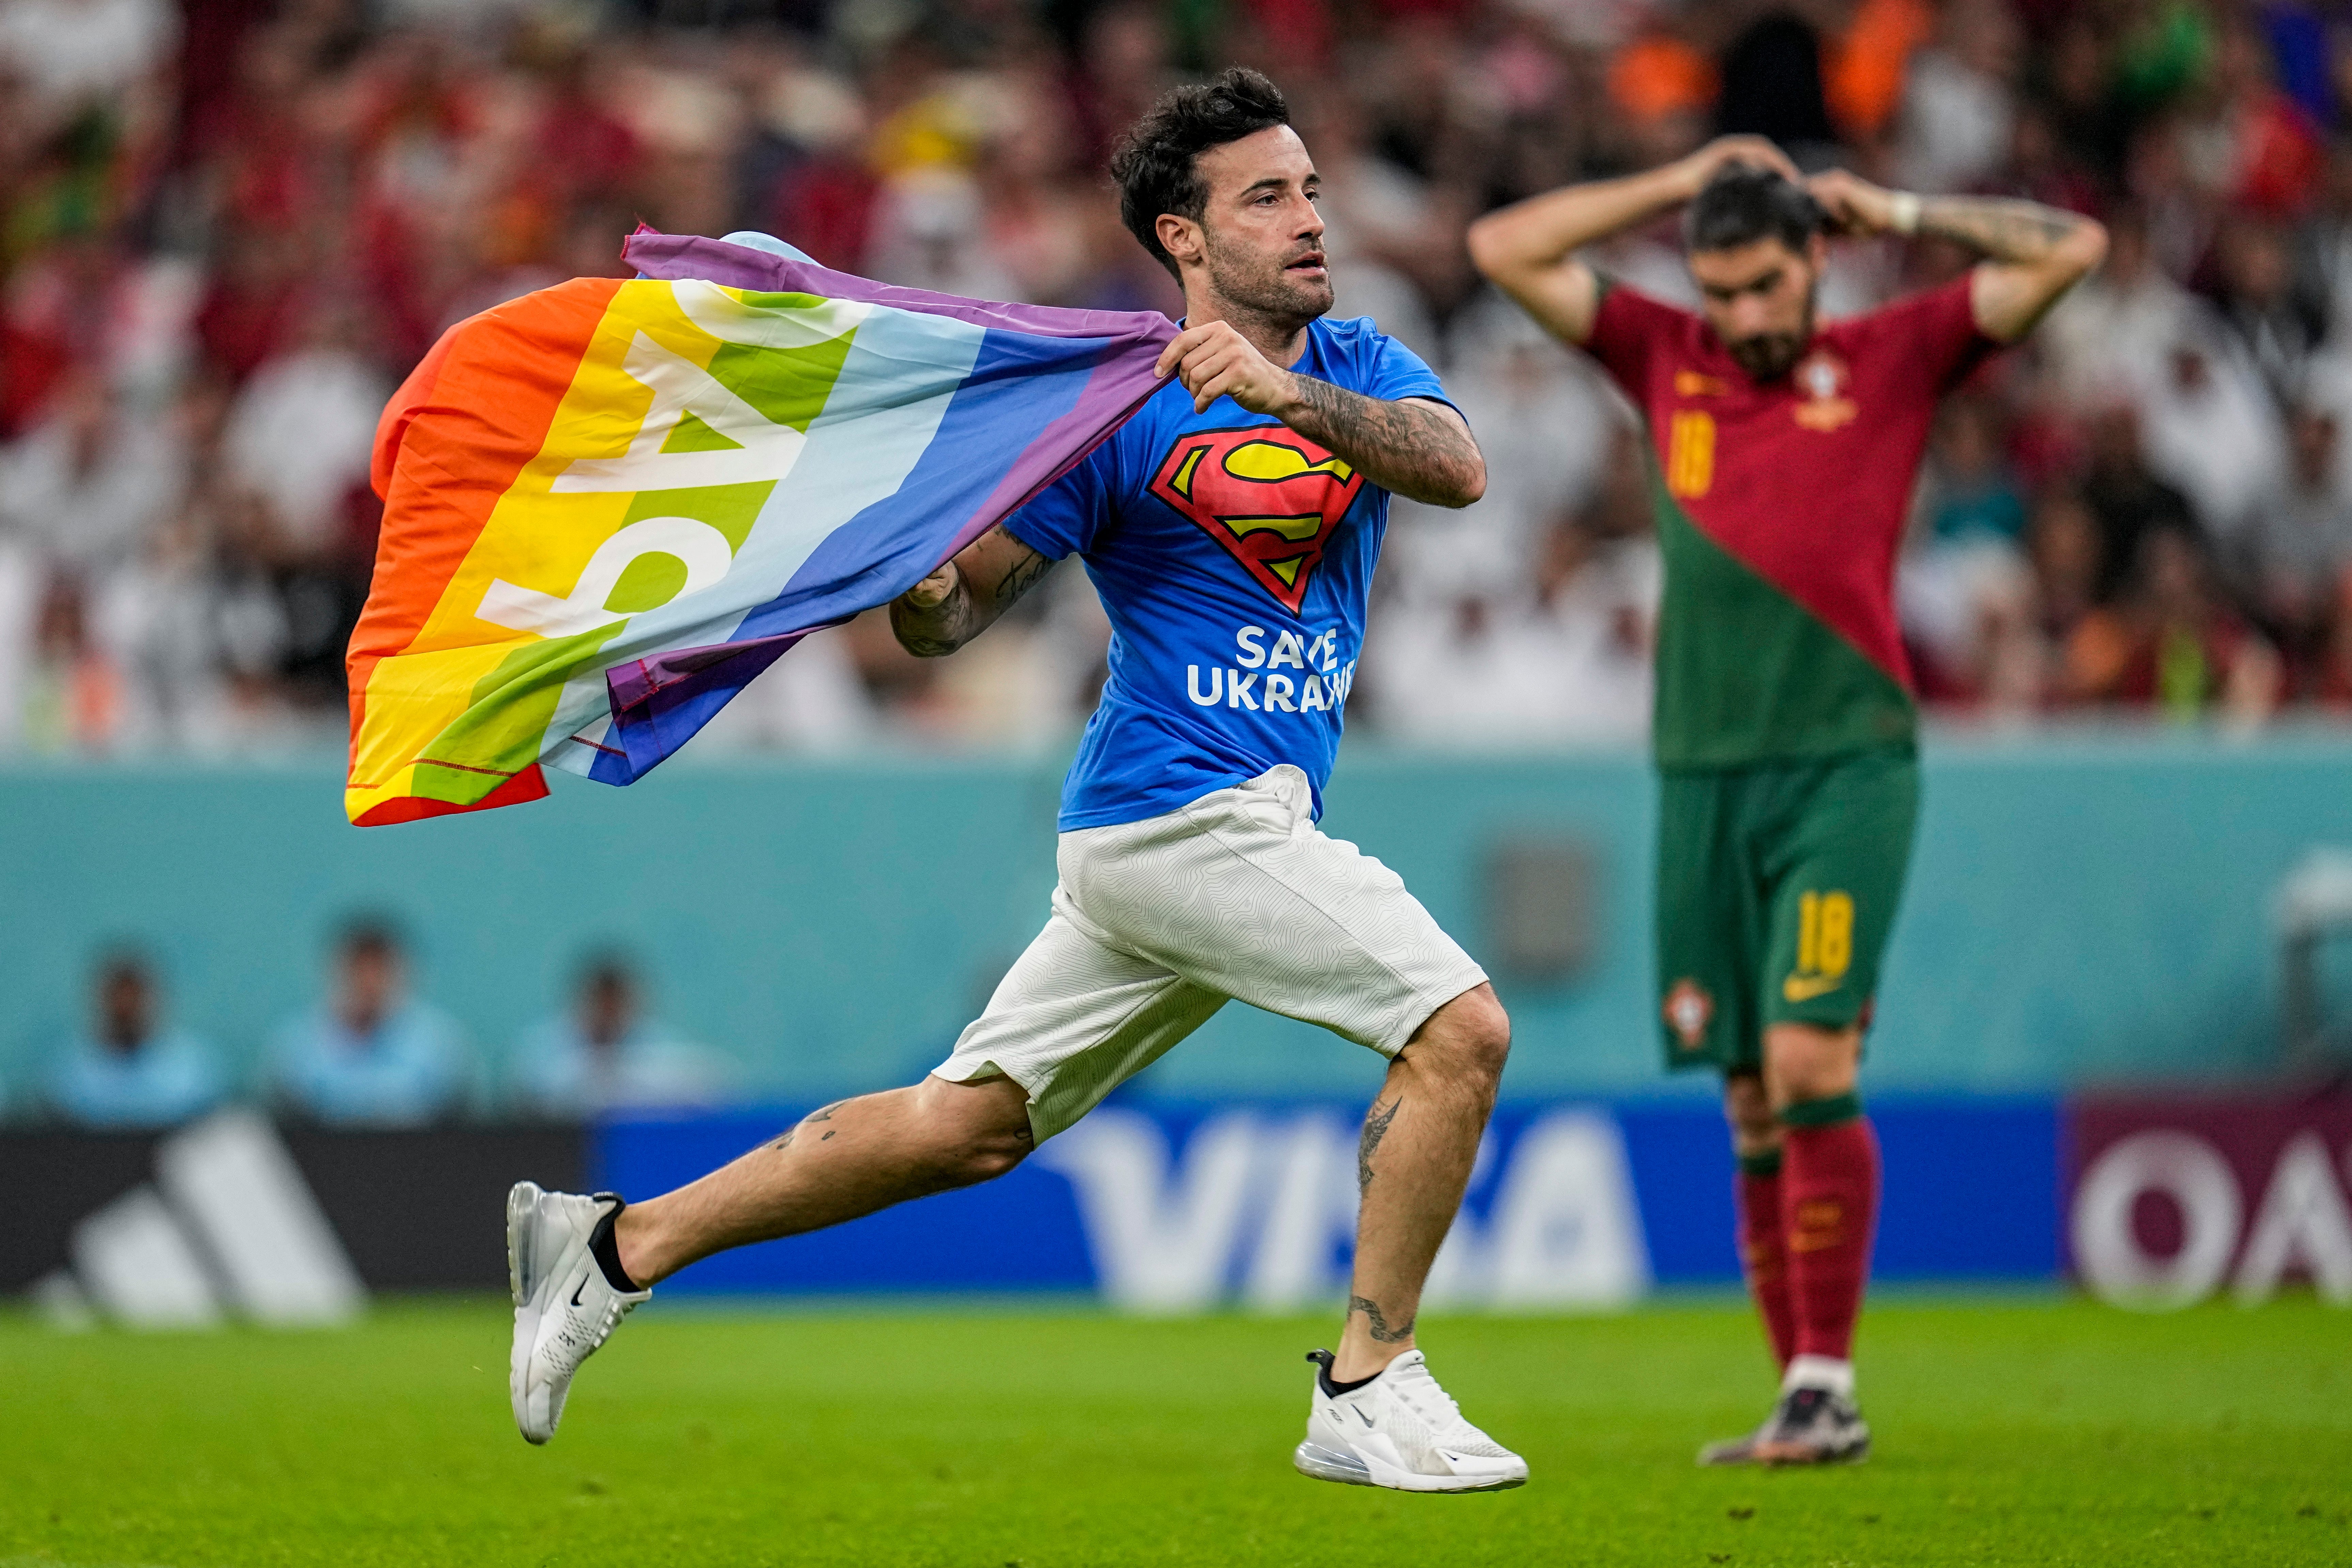 A pitch invader with a rainbow flag in support of LGBT+ rights